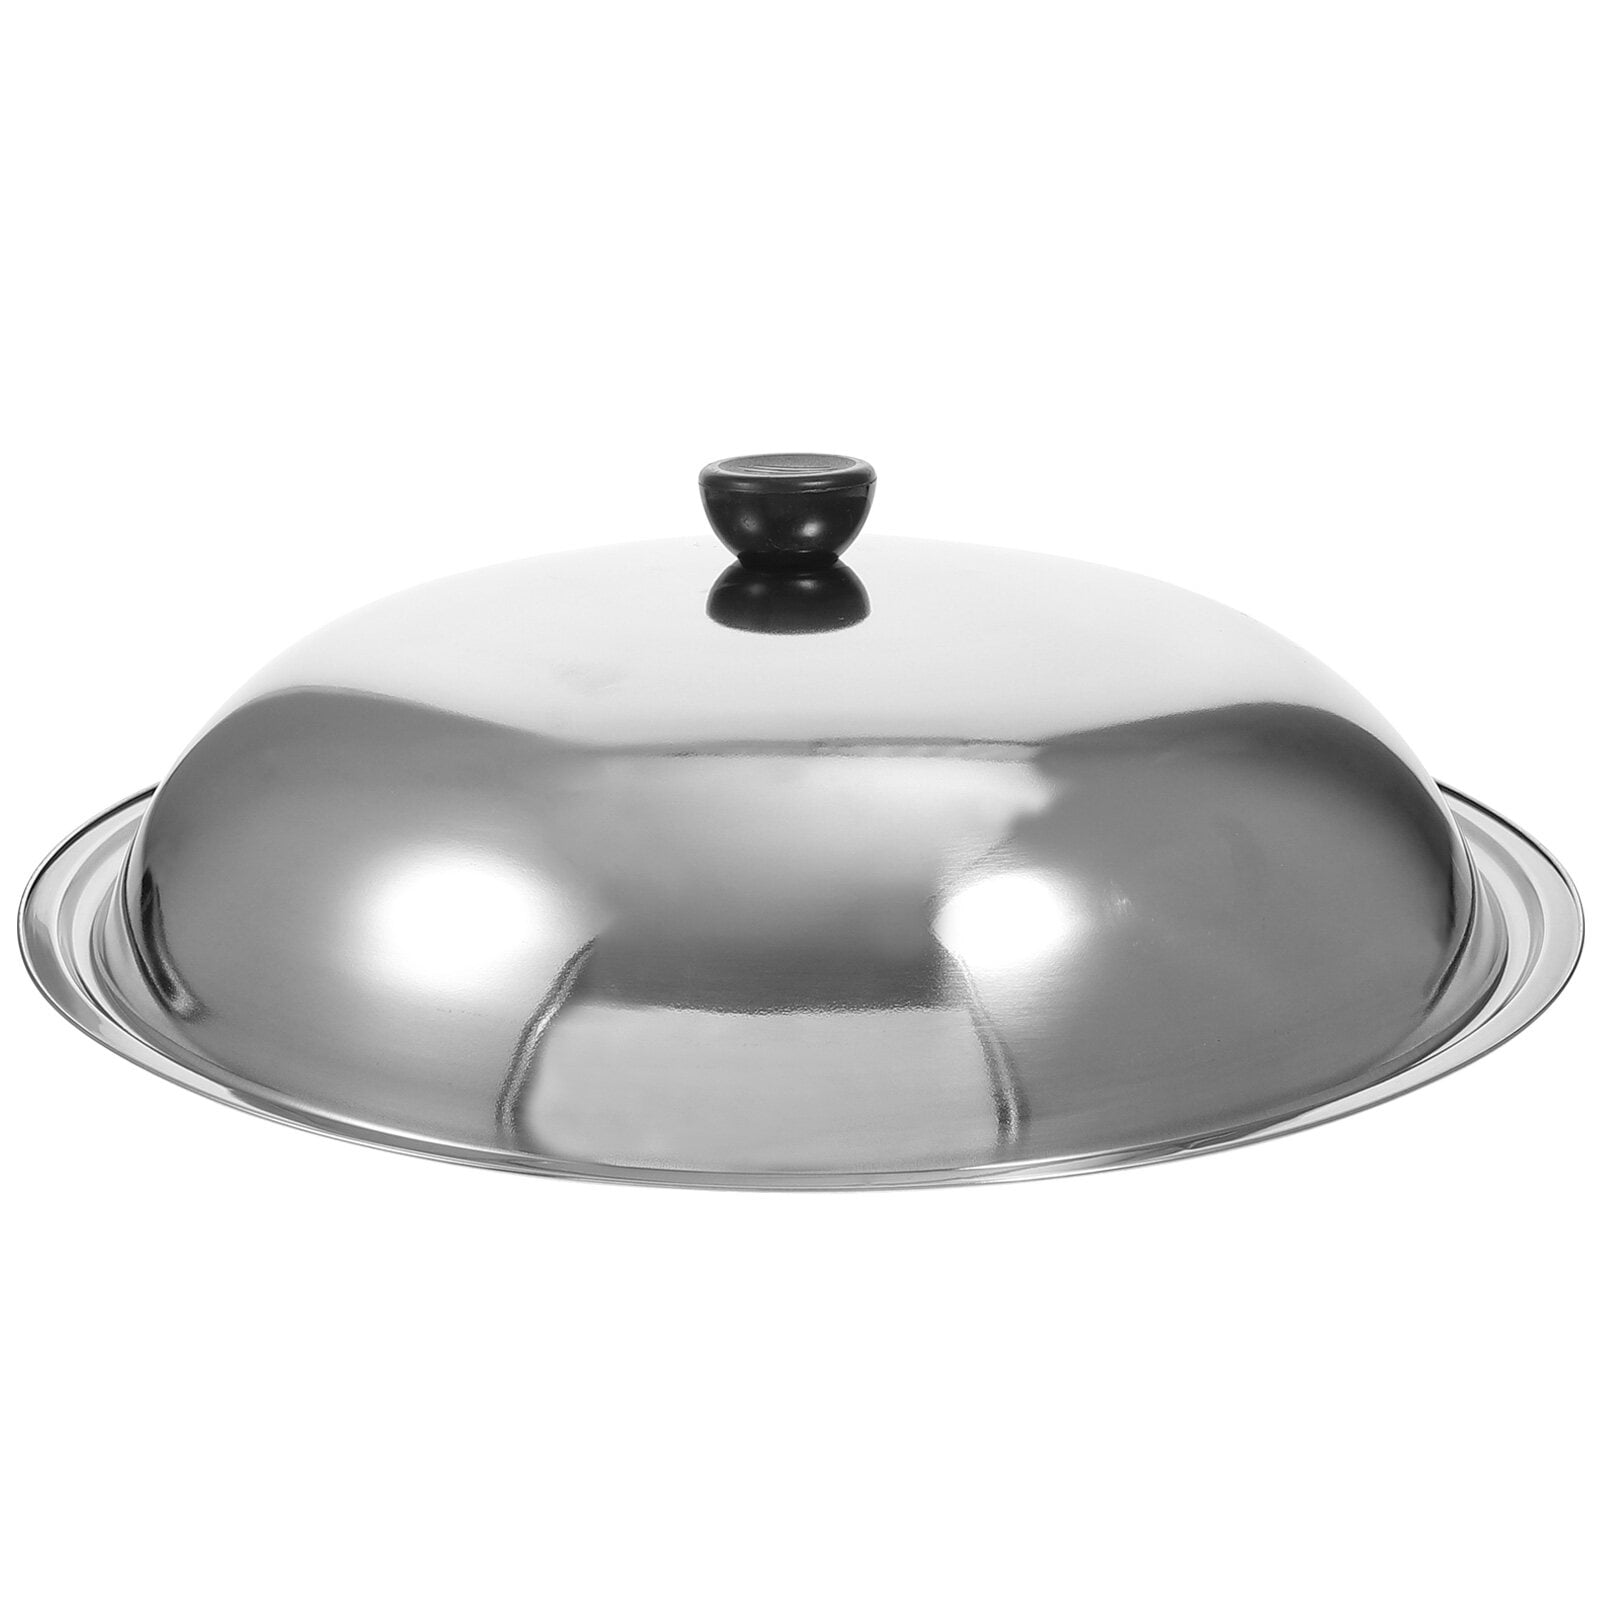 Cleverona Clever Lid - Universal Pan Lid - Large, Dark Grey, Gray